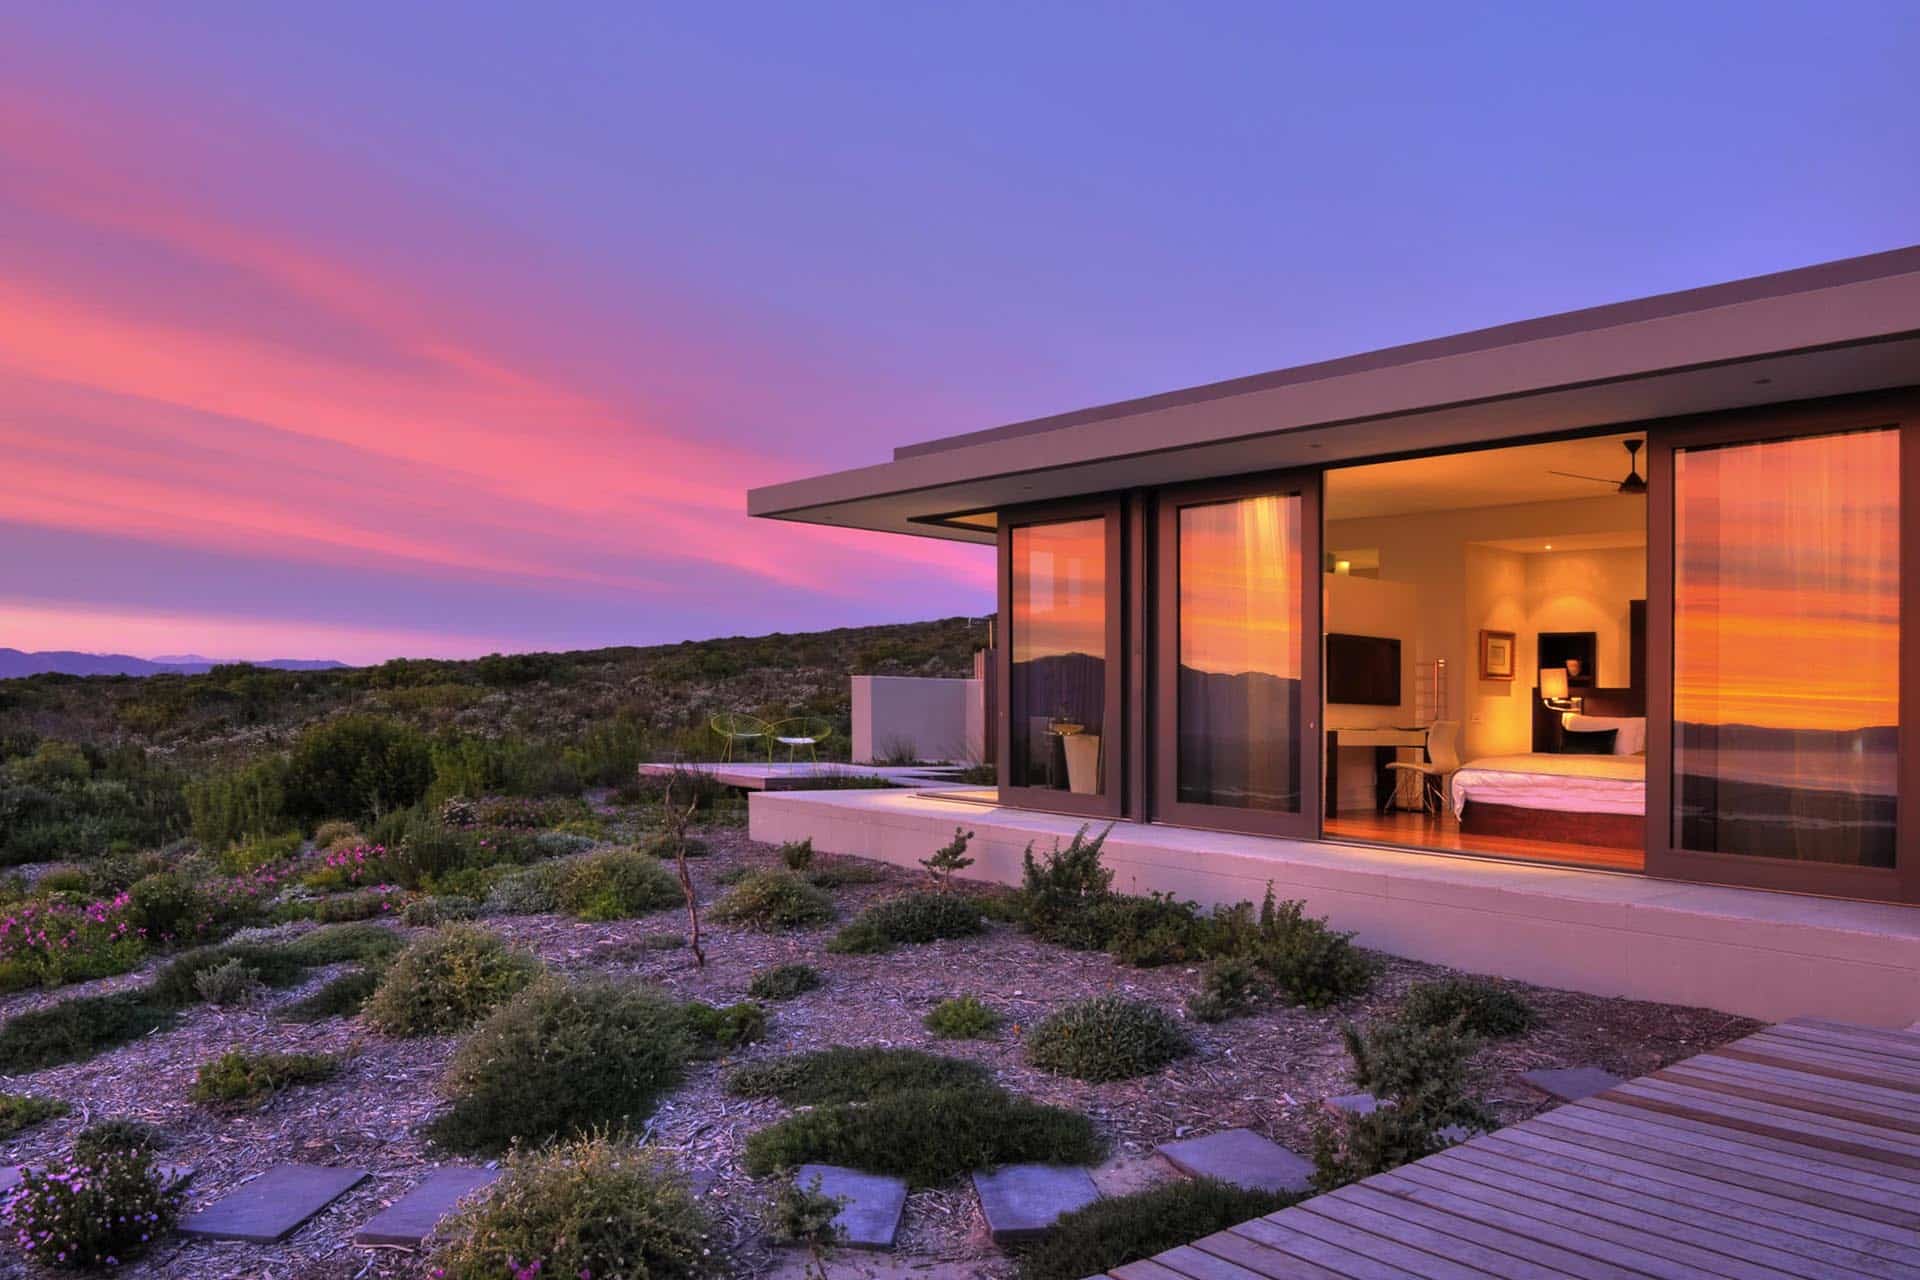 A private villa on the fynbos reserve during sunset at Grootbos Private Nature Reserve – one of the top Eco Lodges in Africa.